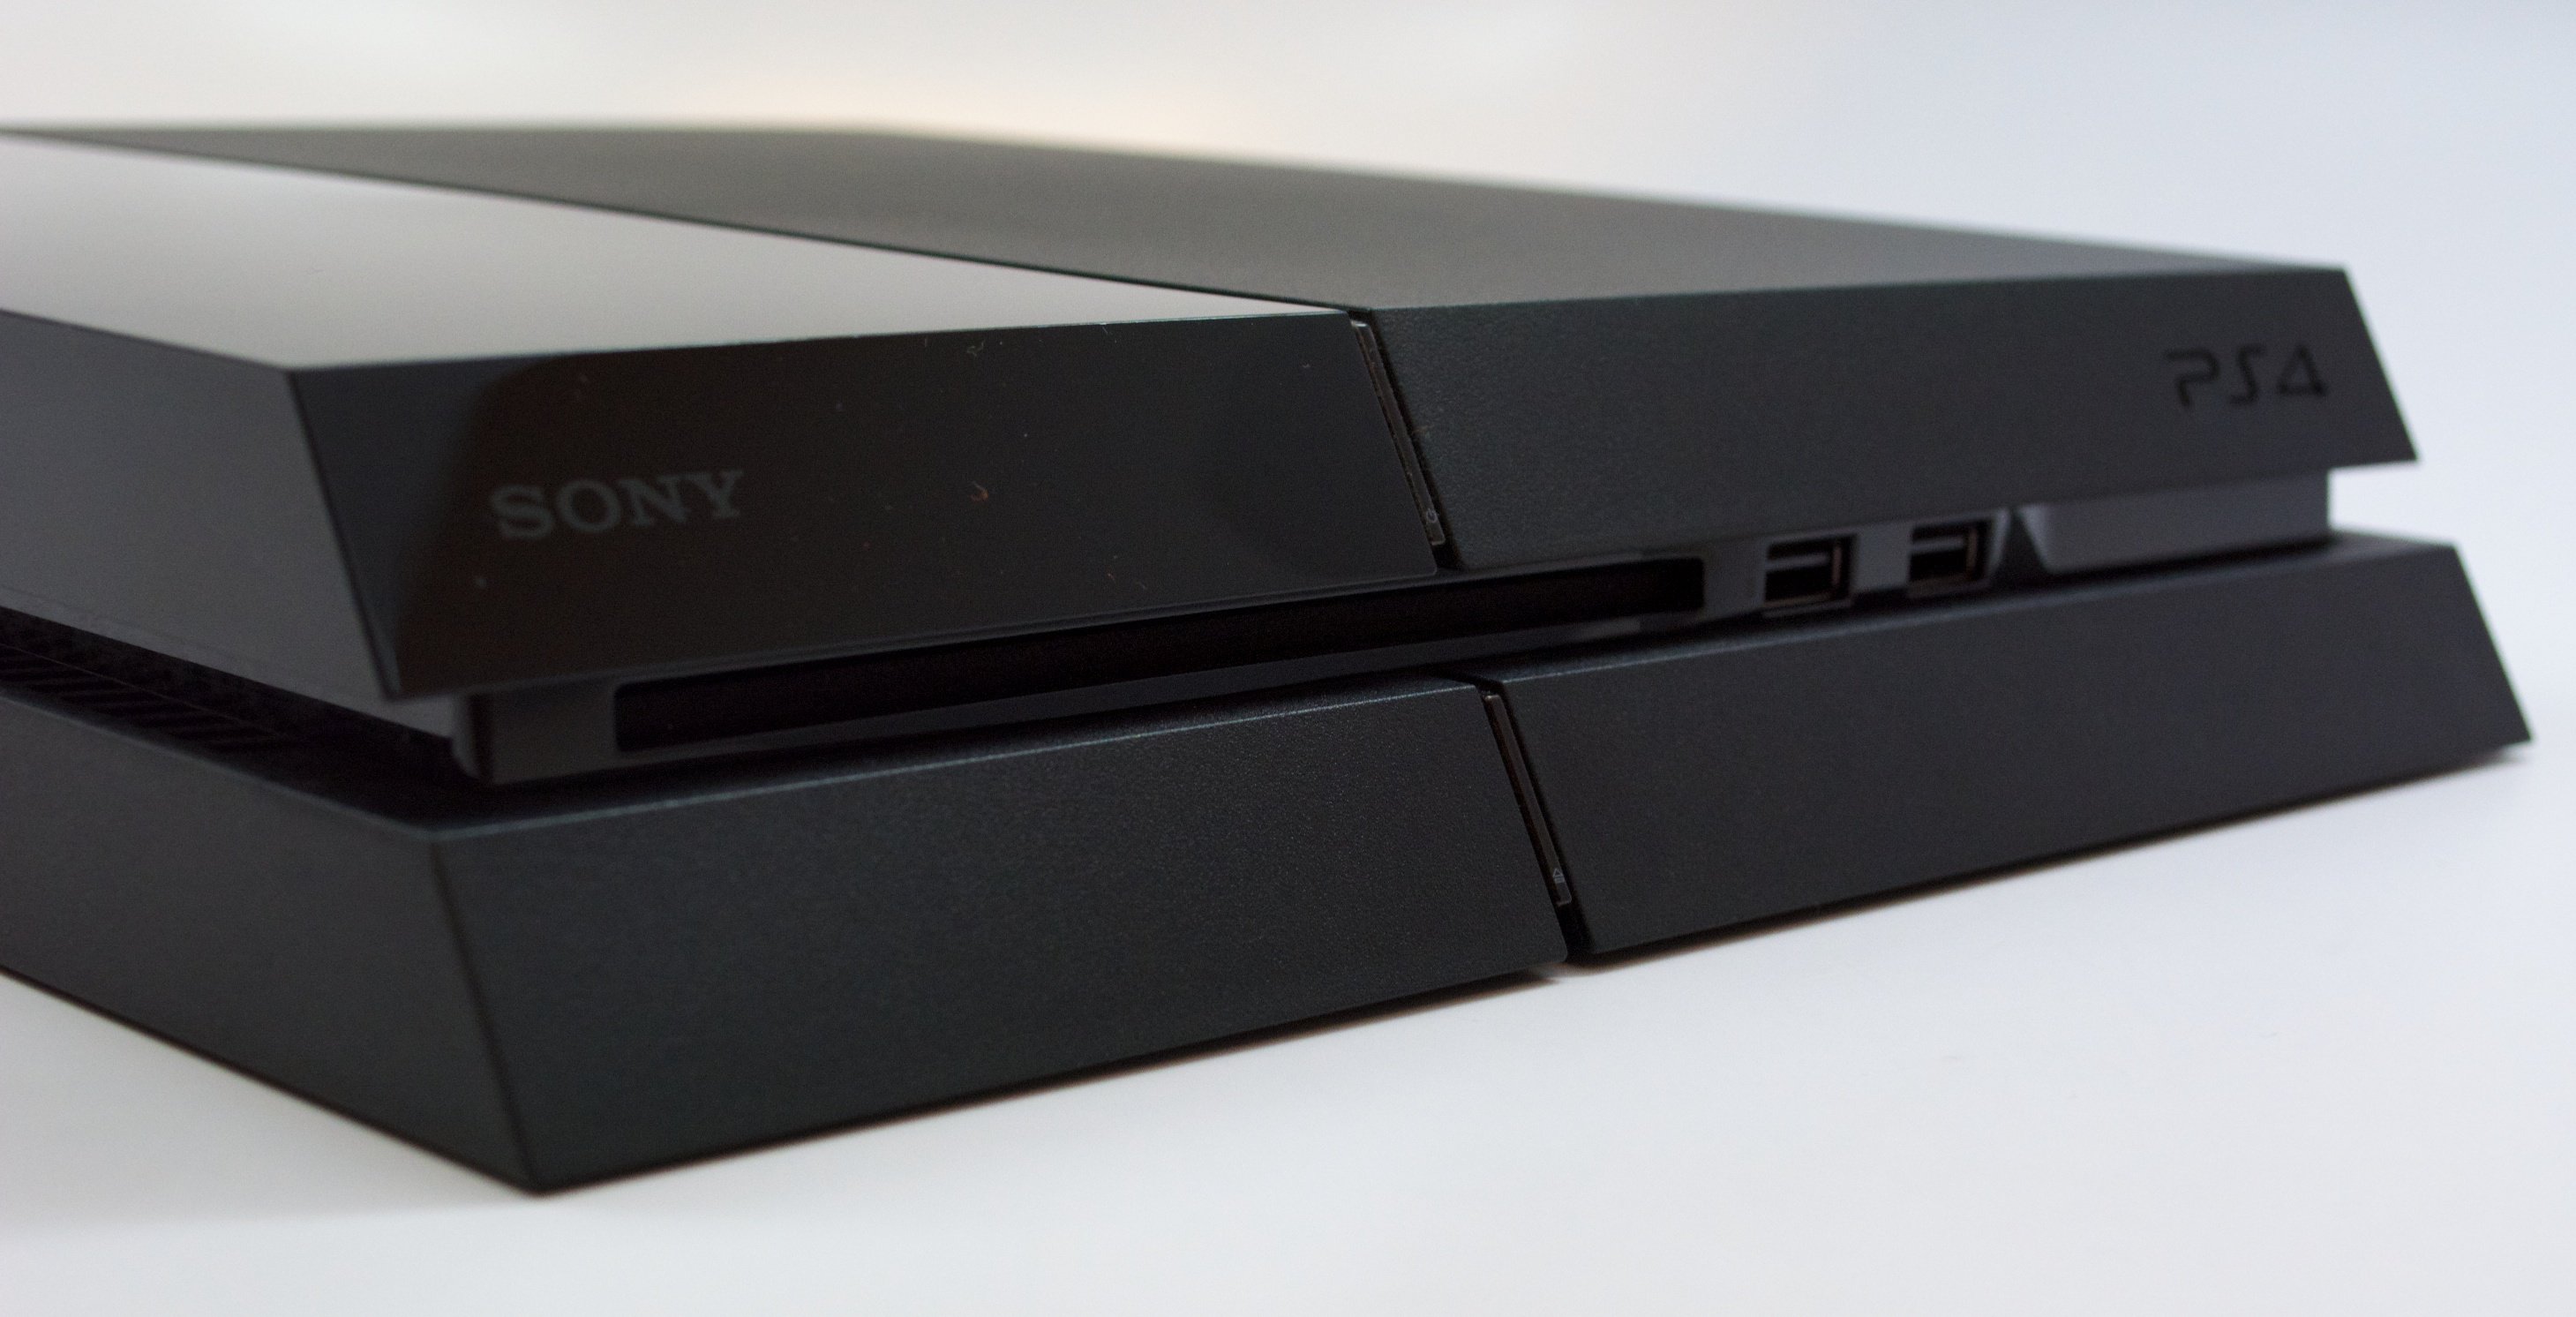 Here's how to buy a cheap pS4 without waiting forever for PS4 deals or a PS4 price cut.